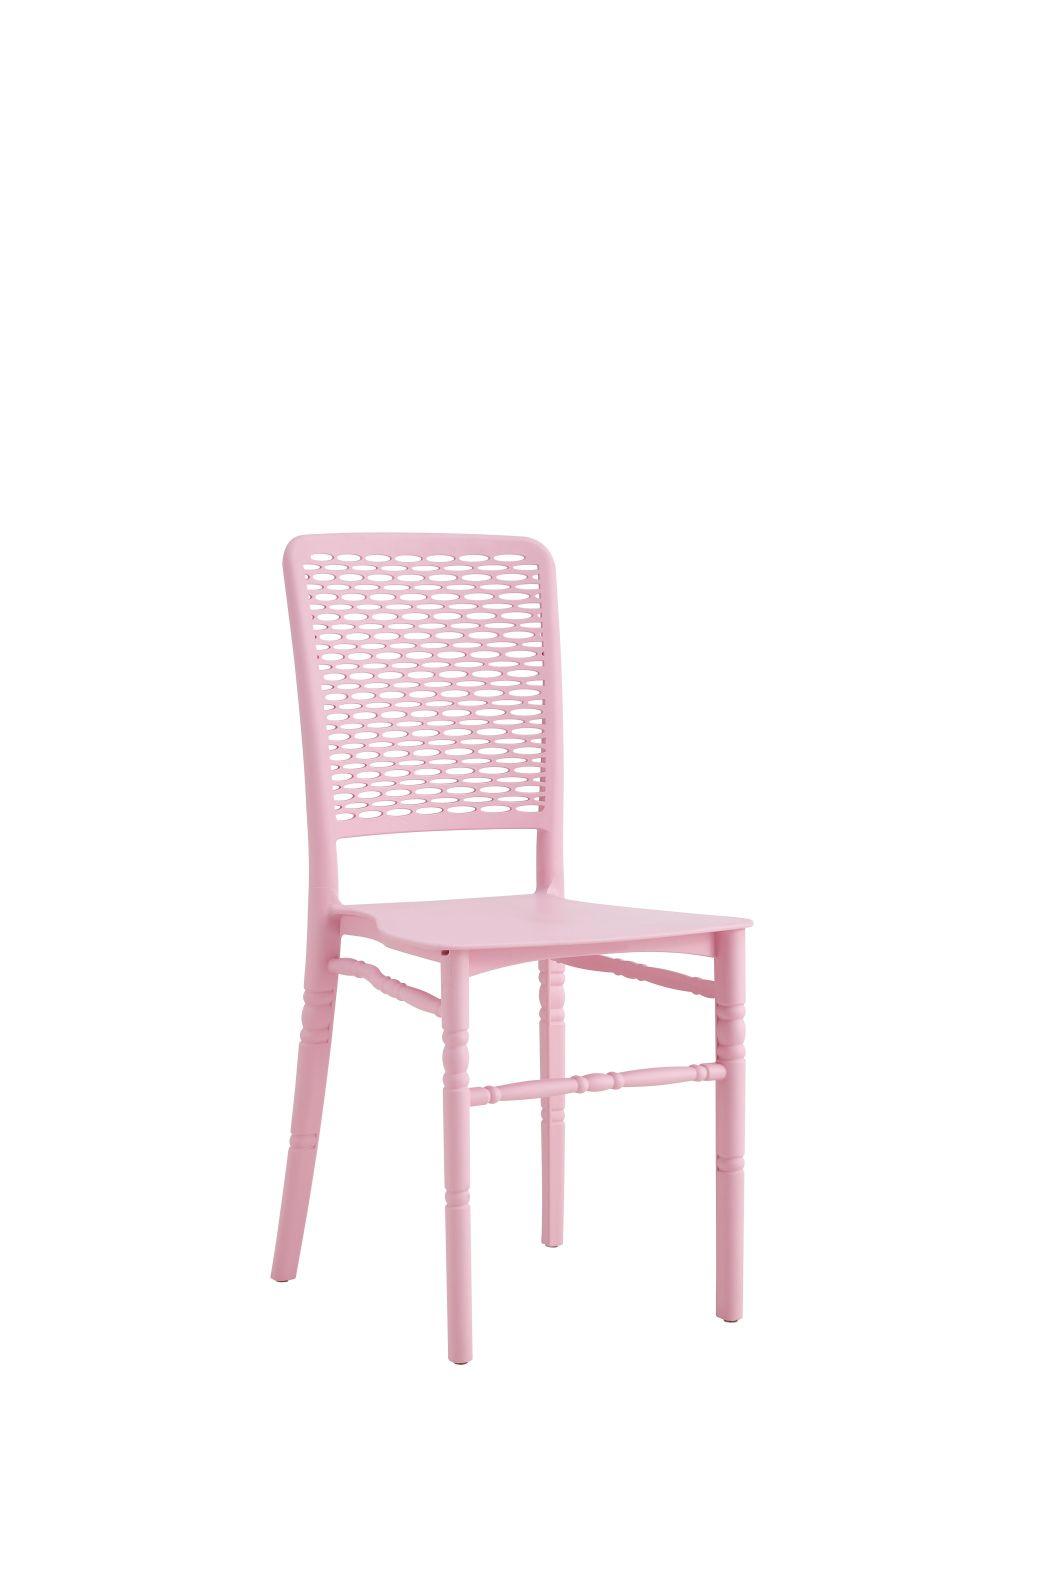 Factory Wholesale Restaurant Chair Stackable Simple Plastic Seat Restaurant Snack Bar Outdoor Chair